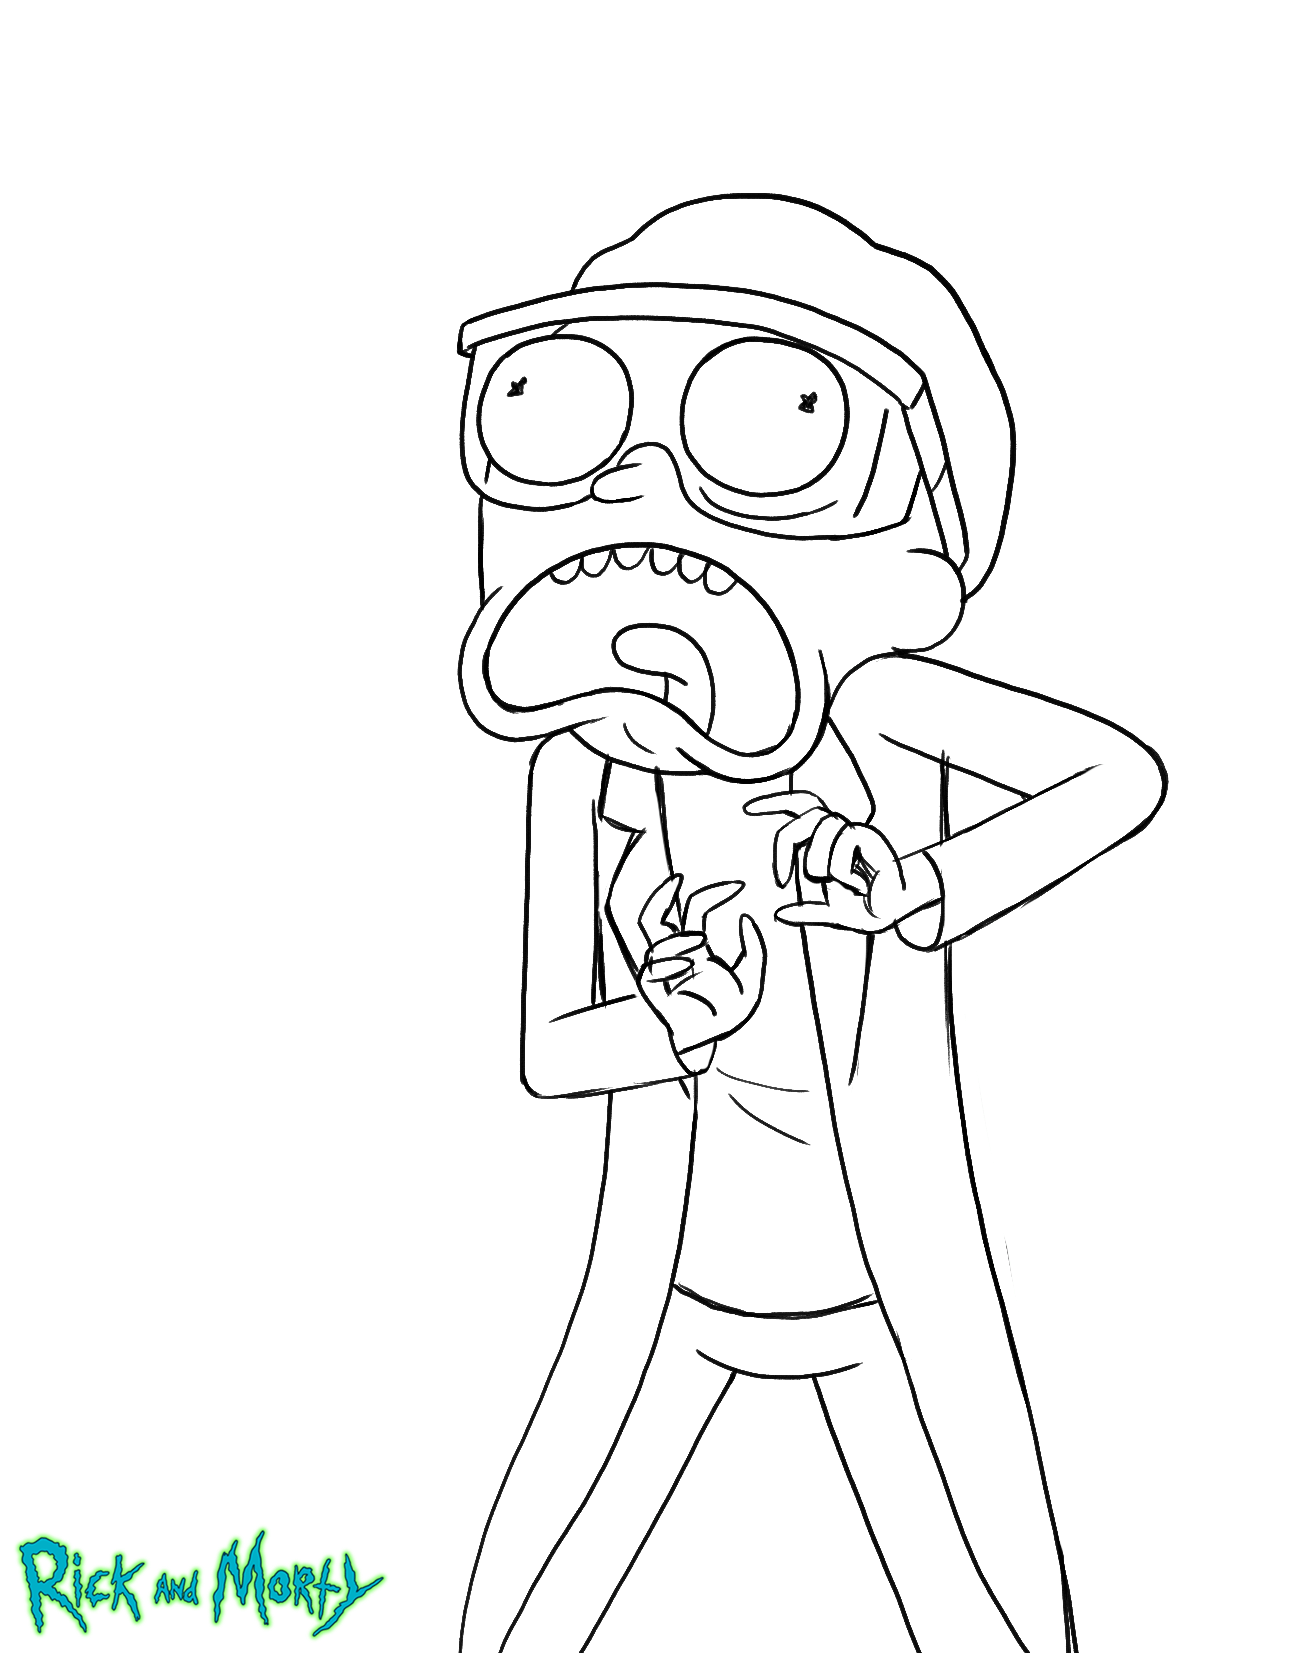 404_CH_BullyDeaths_sc17_Morty_Dissolved_gif_Rough_JN.gif